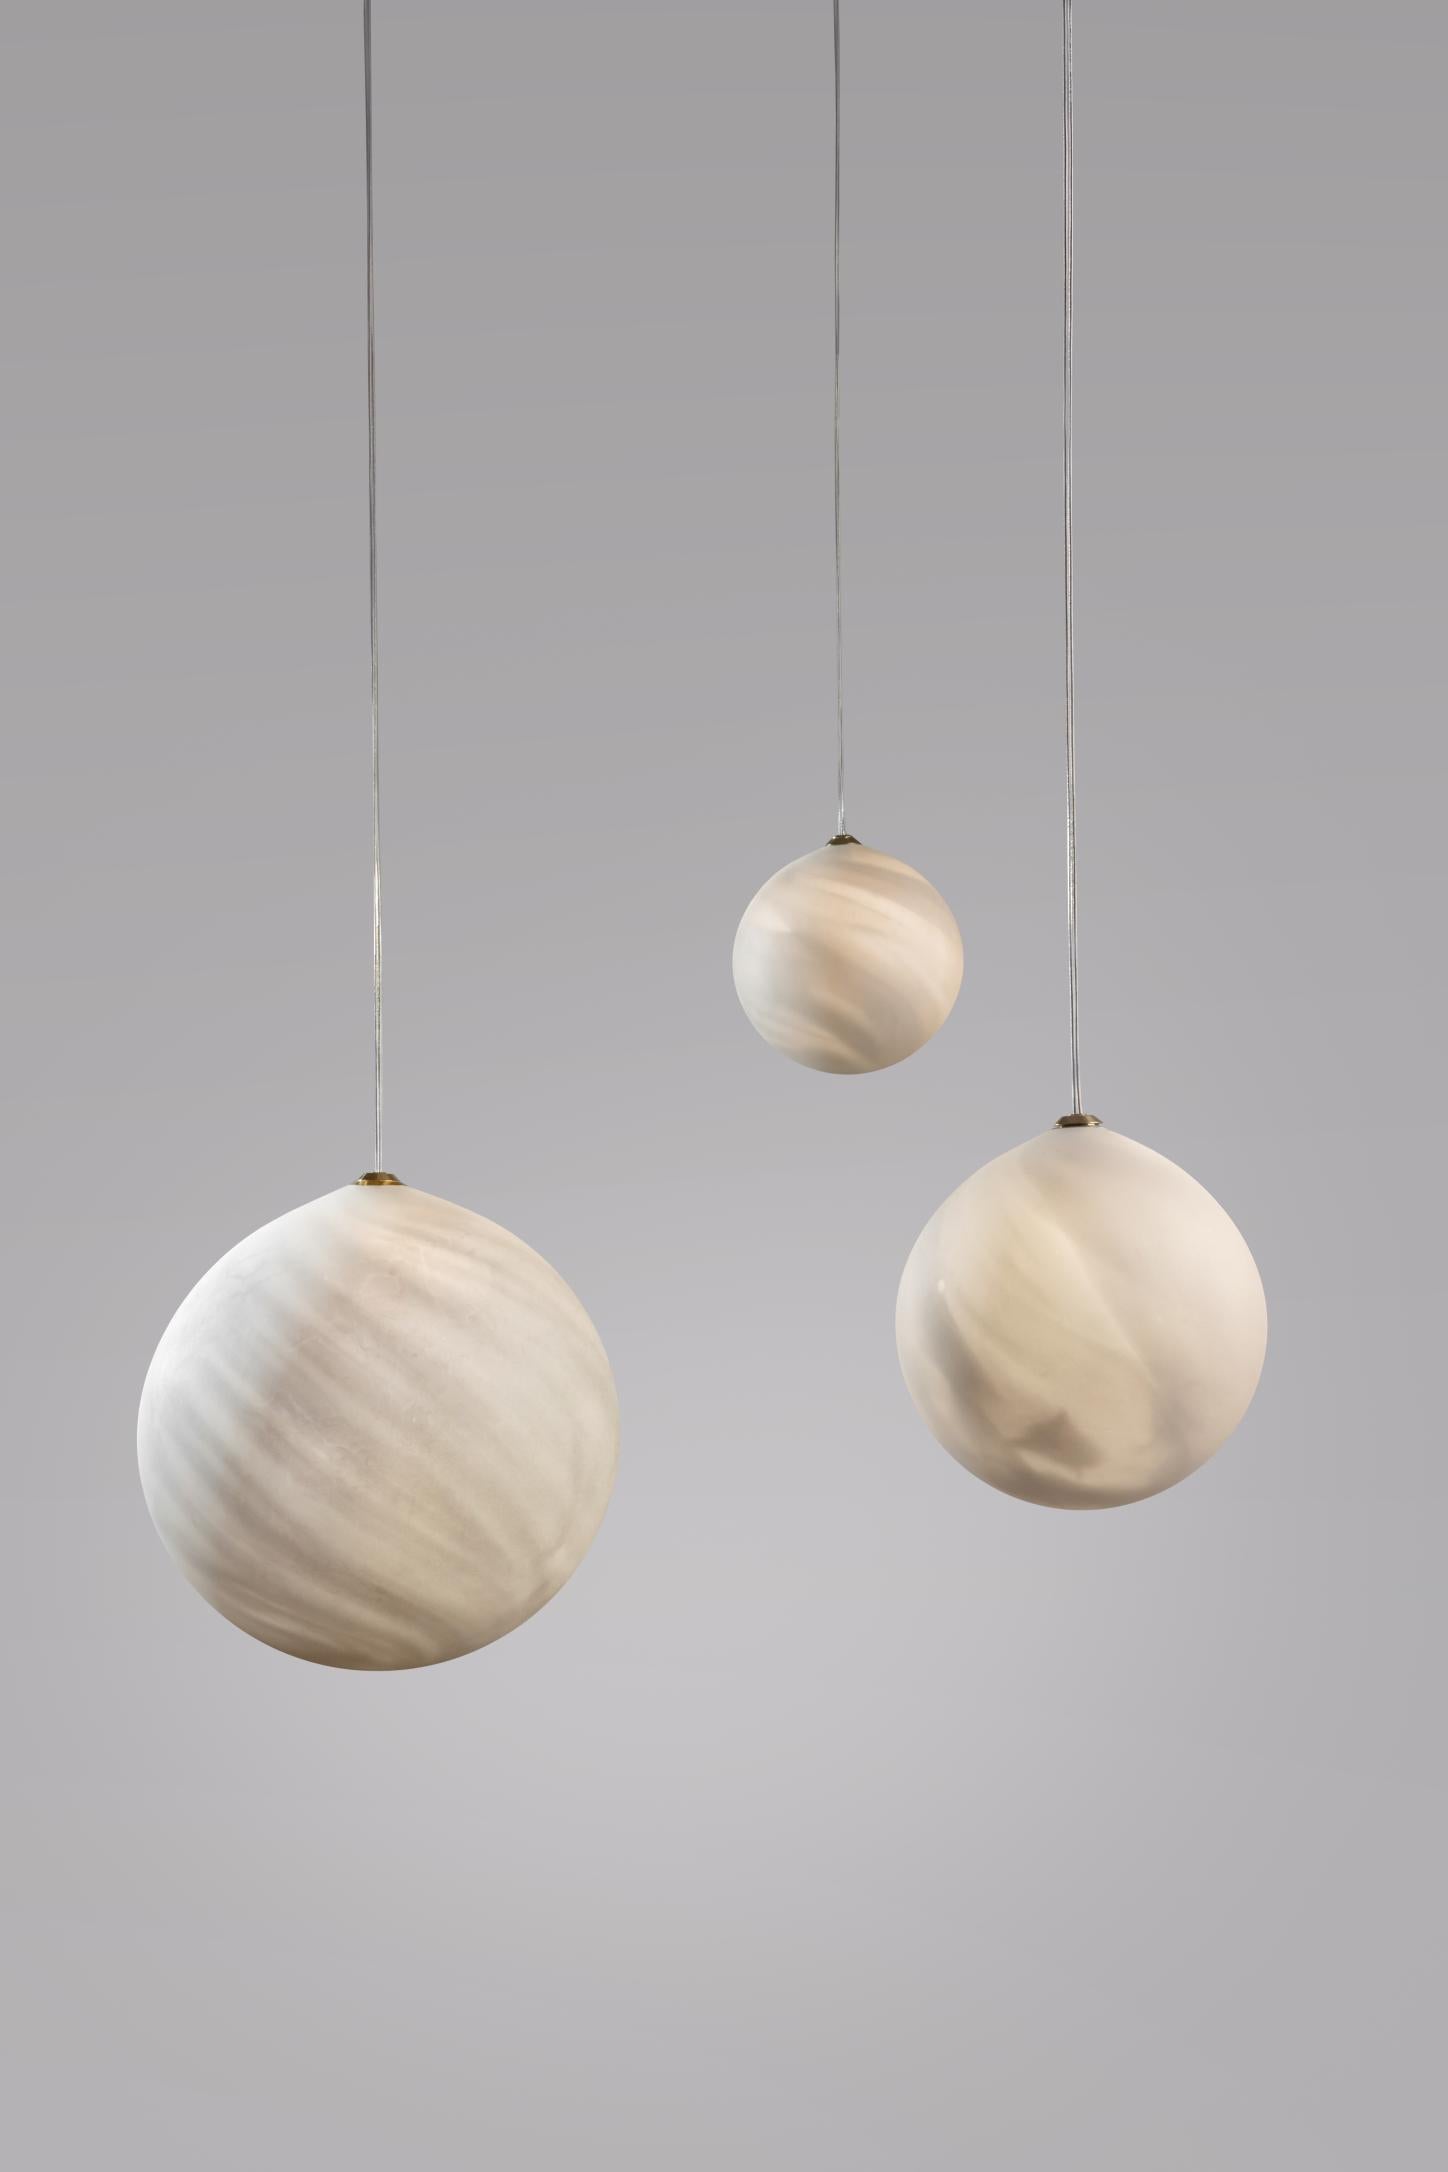 Saturne hanging lights planets, Ludovic Clément d’Armont
Every creation of Ludovic Clément d’Armont can be made to order in any requested dimensions.
Blown glass
Dimensions of the planets can vary in the following dimensions: 10 cm, 14 cm, 18 cm,